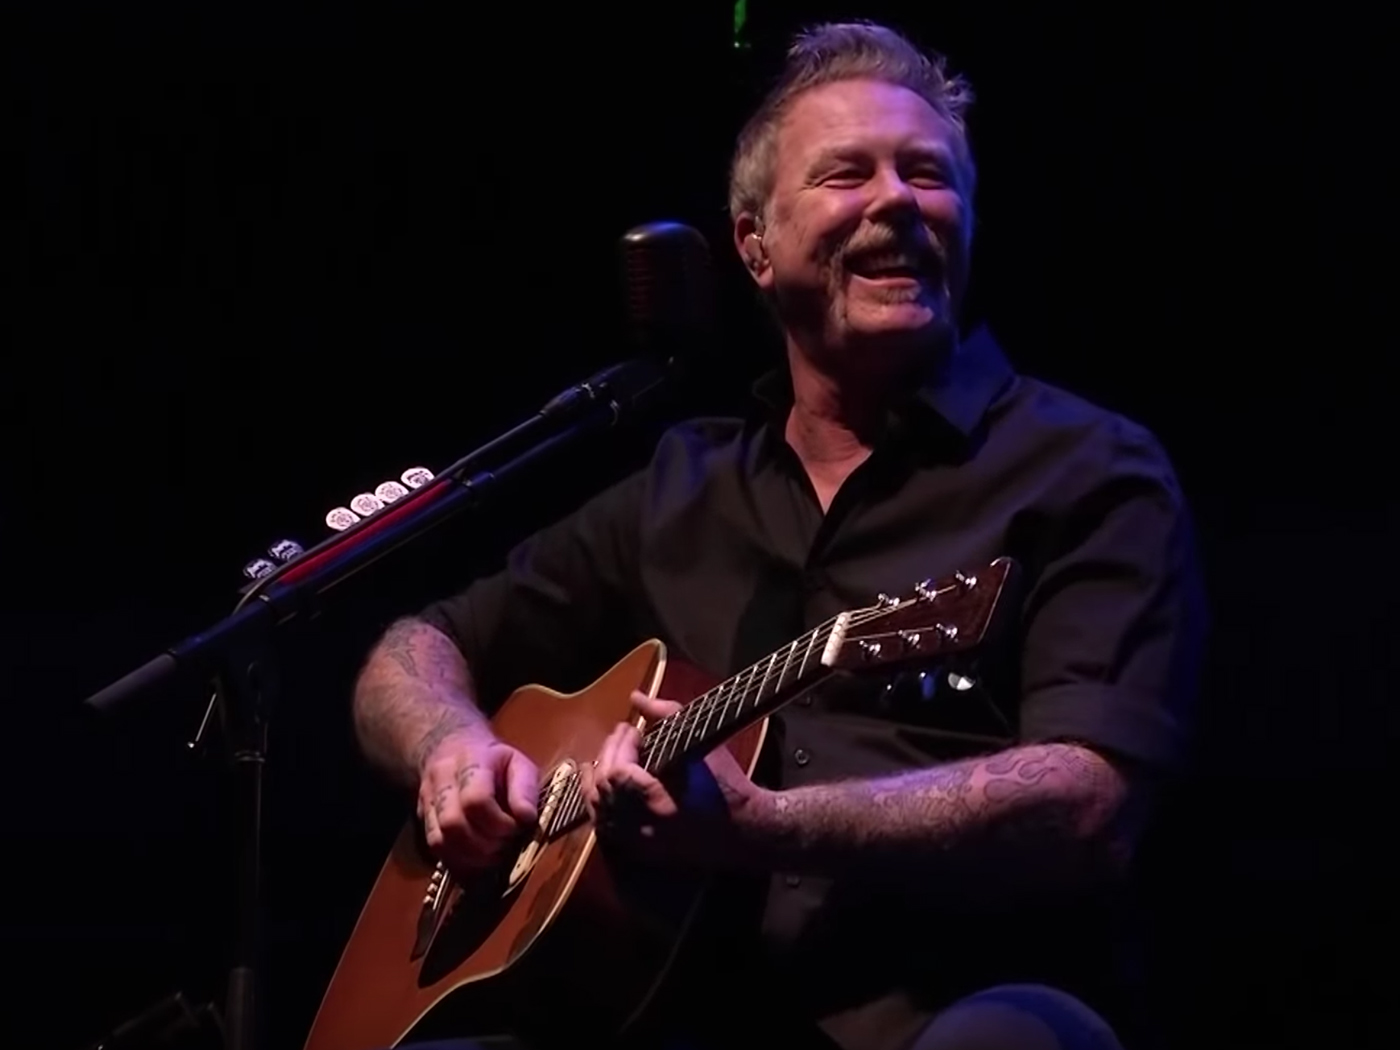 Watch: Metallica deliver an acoustic rendition of “Disposable Heroes”